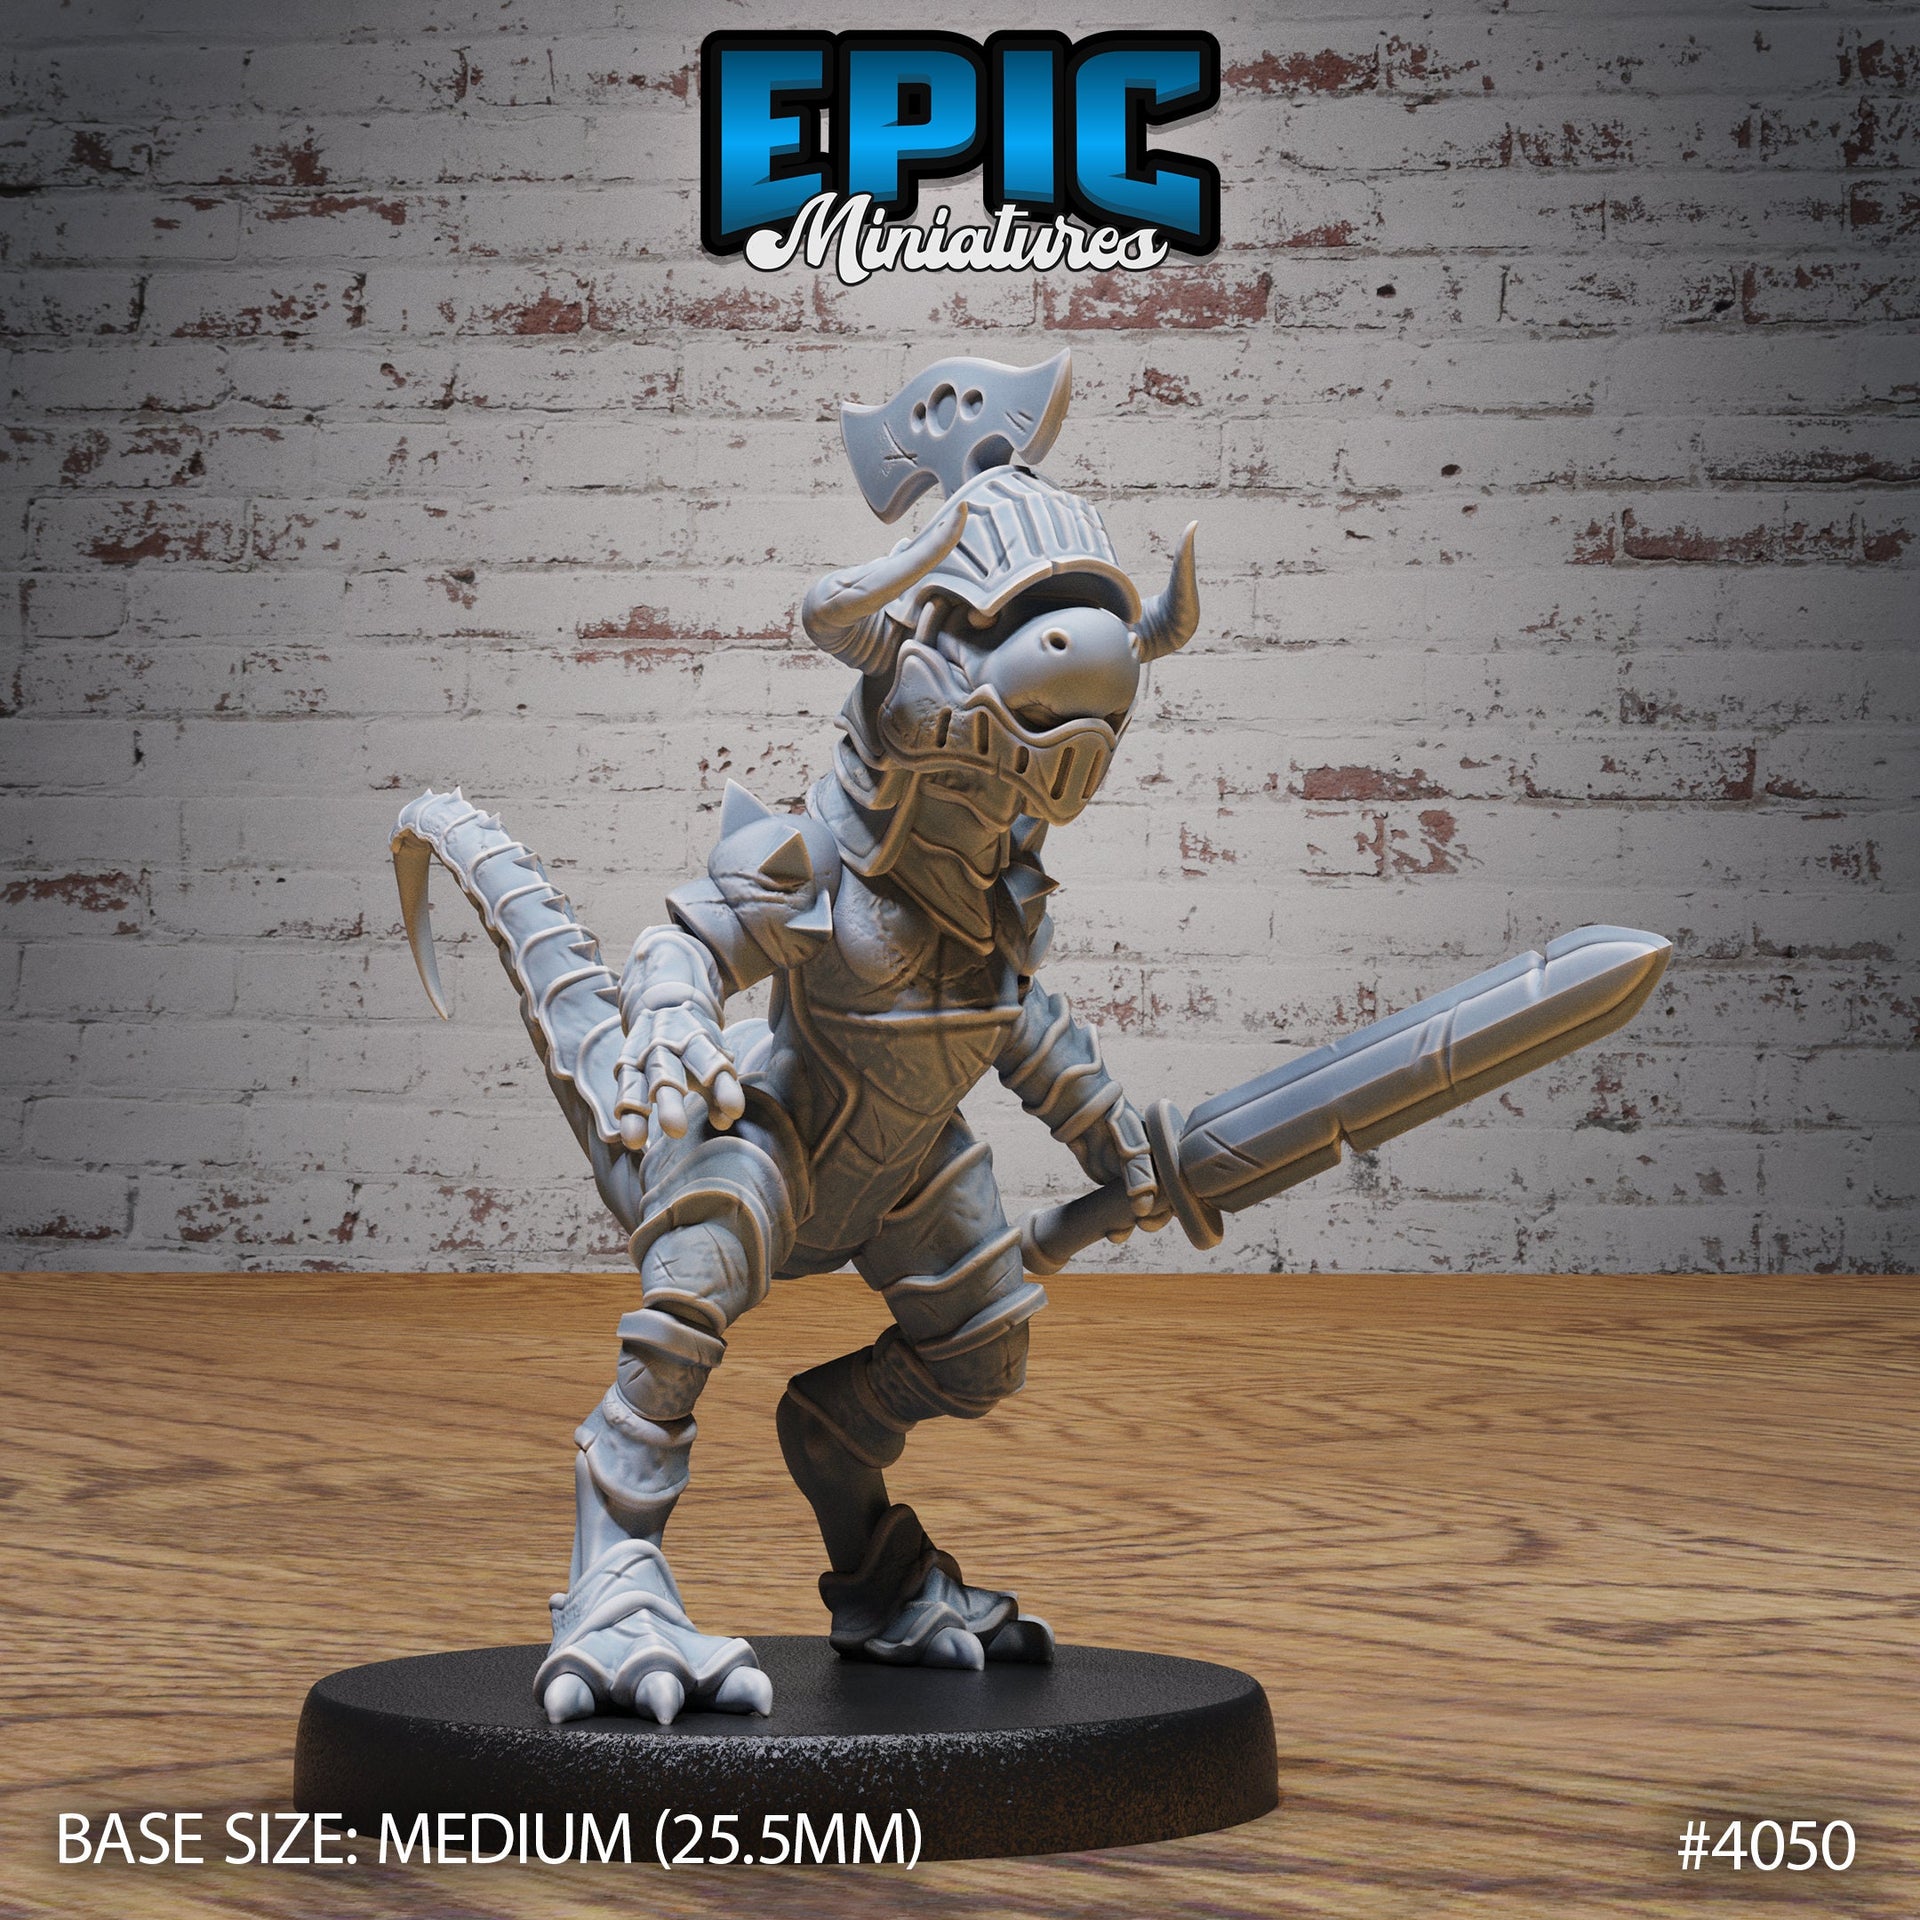 Dino Knight - Epic Miniatures | Elemental Lands | 28mm | 32mm | Fighter | Archer | Baby